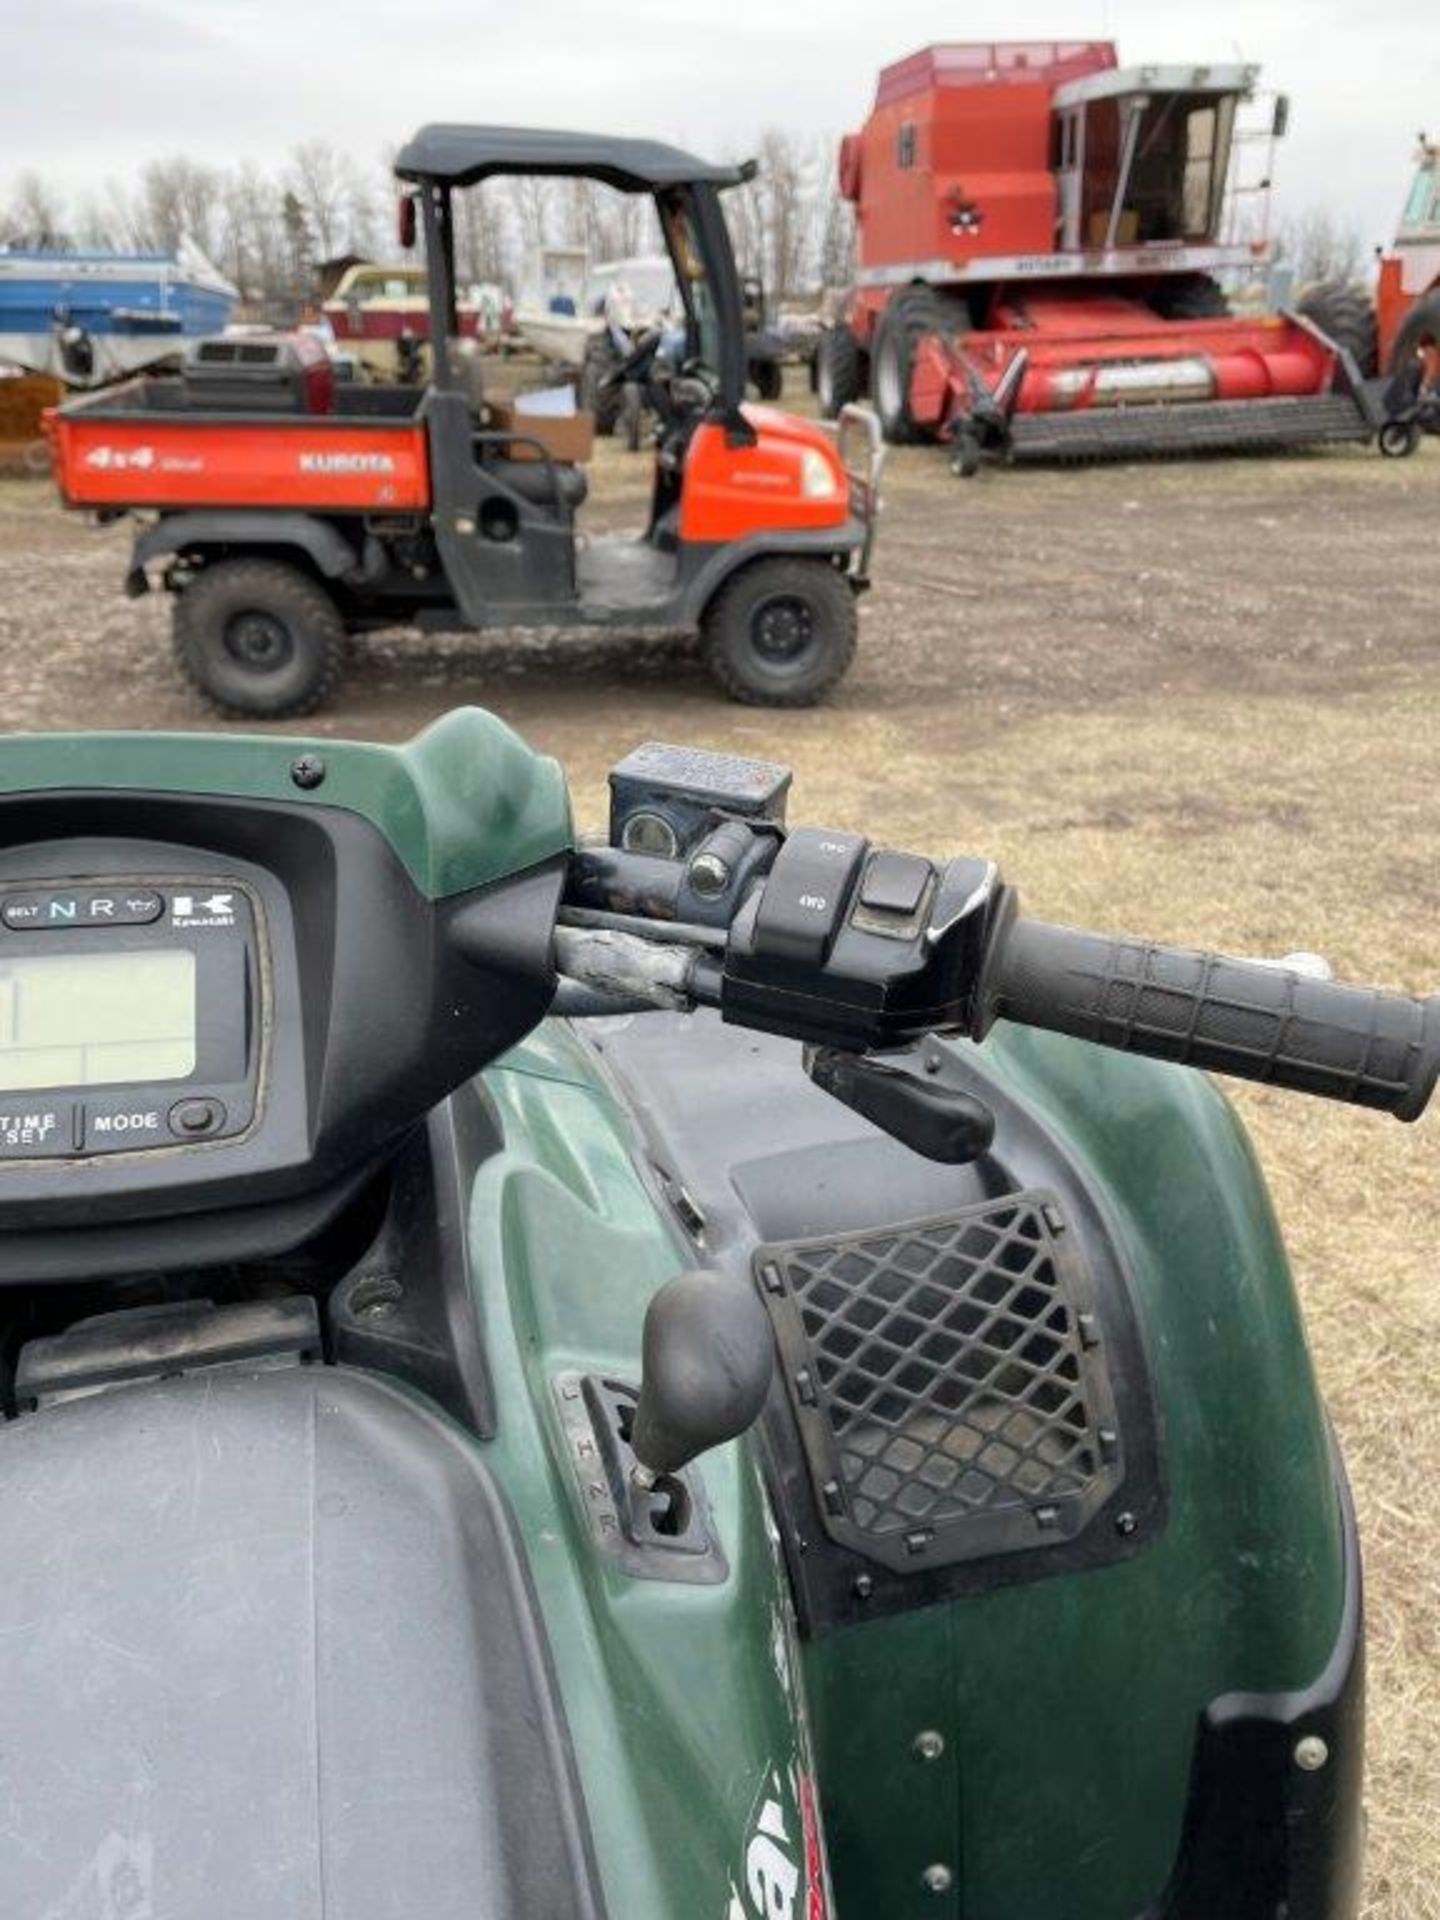 2007 KAWASAKI BRUTE FORCE 750 ATV 4X4 AUTO, RECENT CARB CLEAN, NEW BATTERY, 1762 KM'S SHOWING - Image 19 of 19